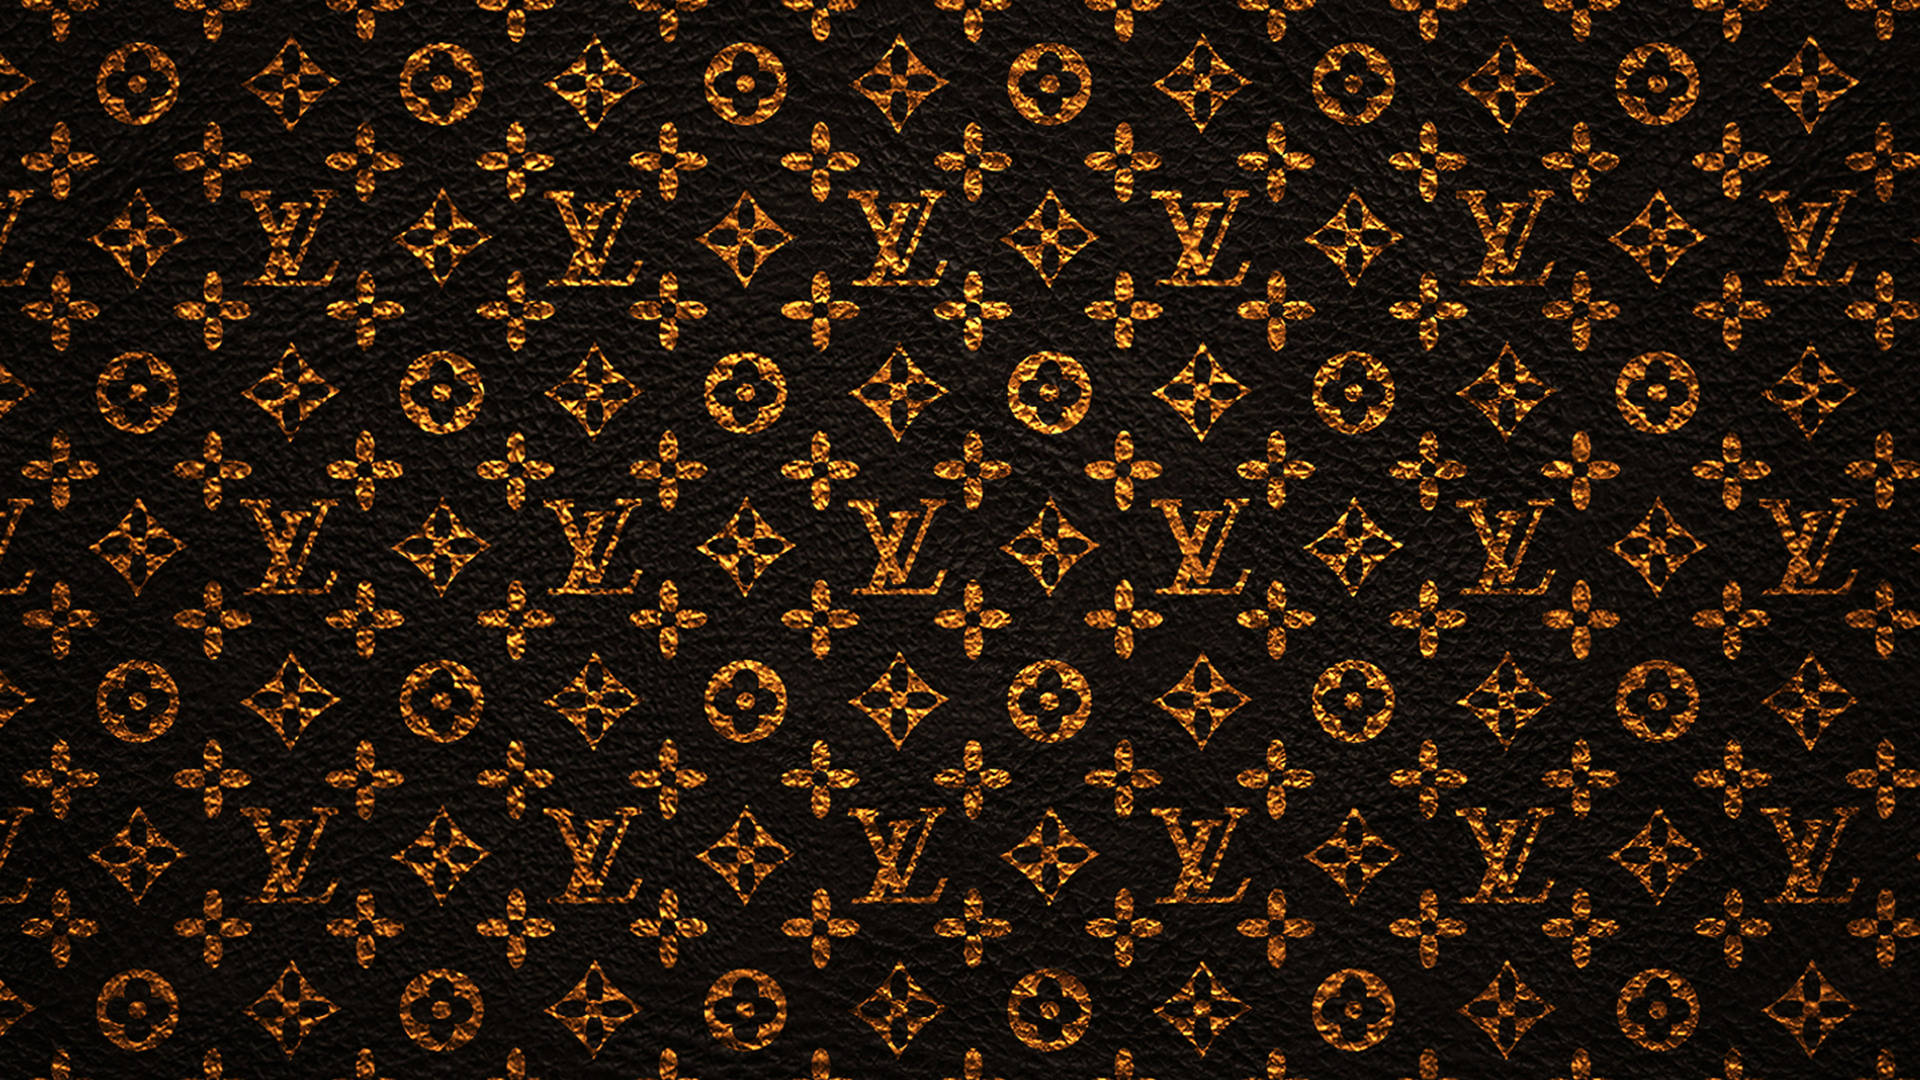 Fashion has a whole new texture with this LV pattern. Wallpaper